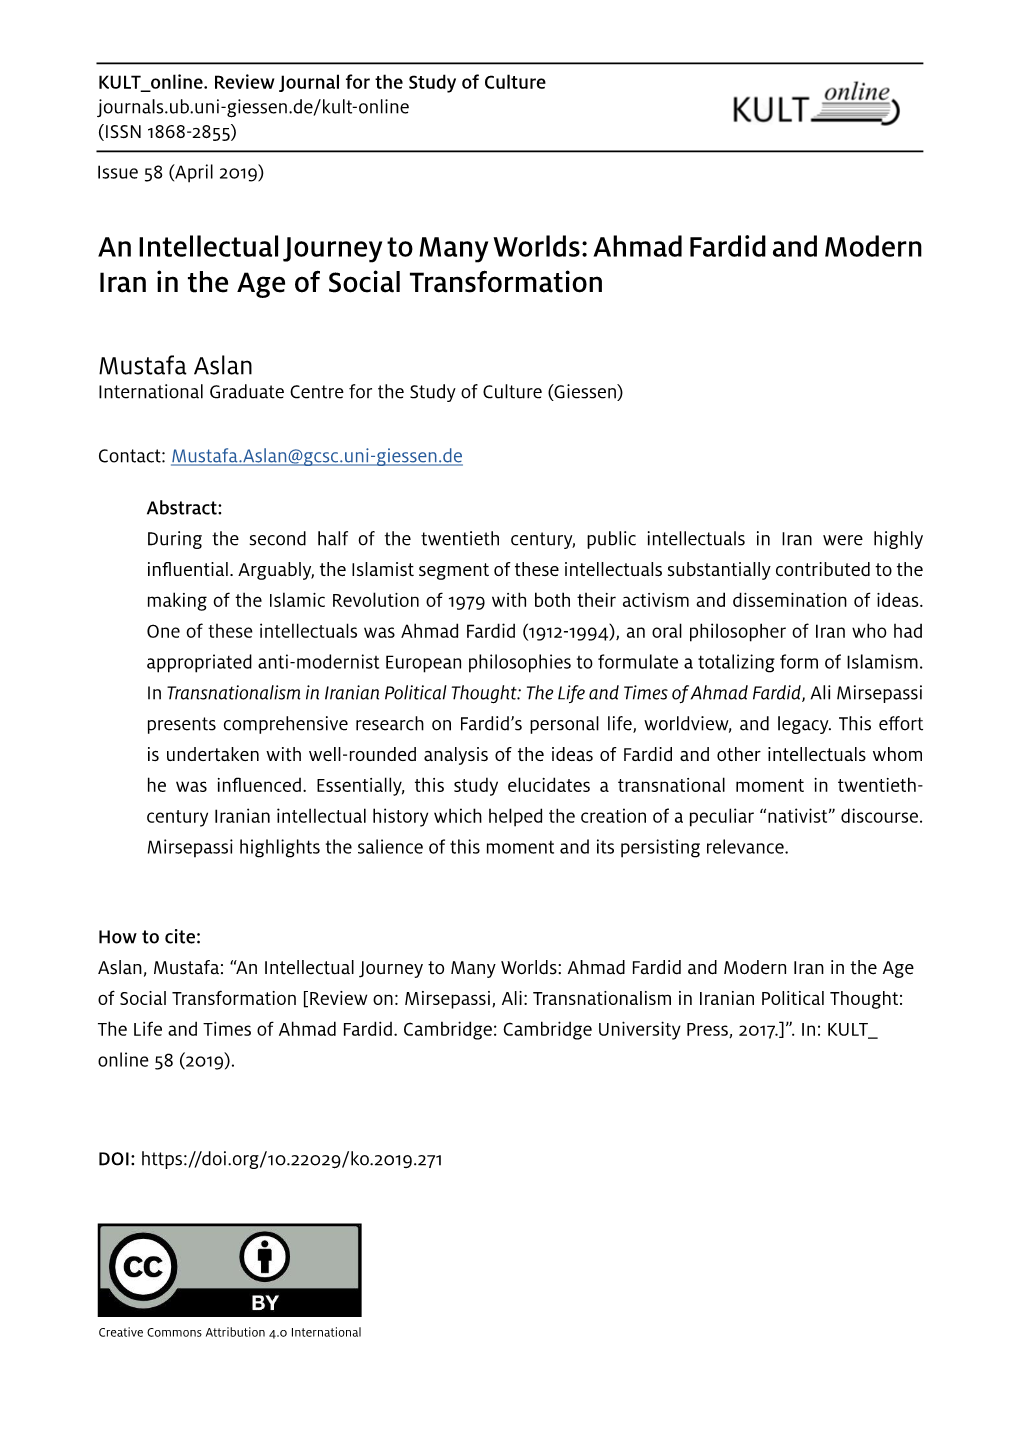 An Intellectual Journey to Many Worlds: Ahmad Fardid and Modern Iran in the Age of Social Transformation